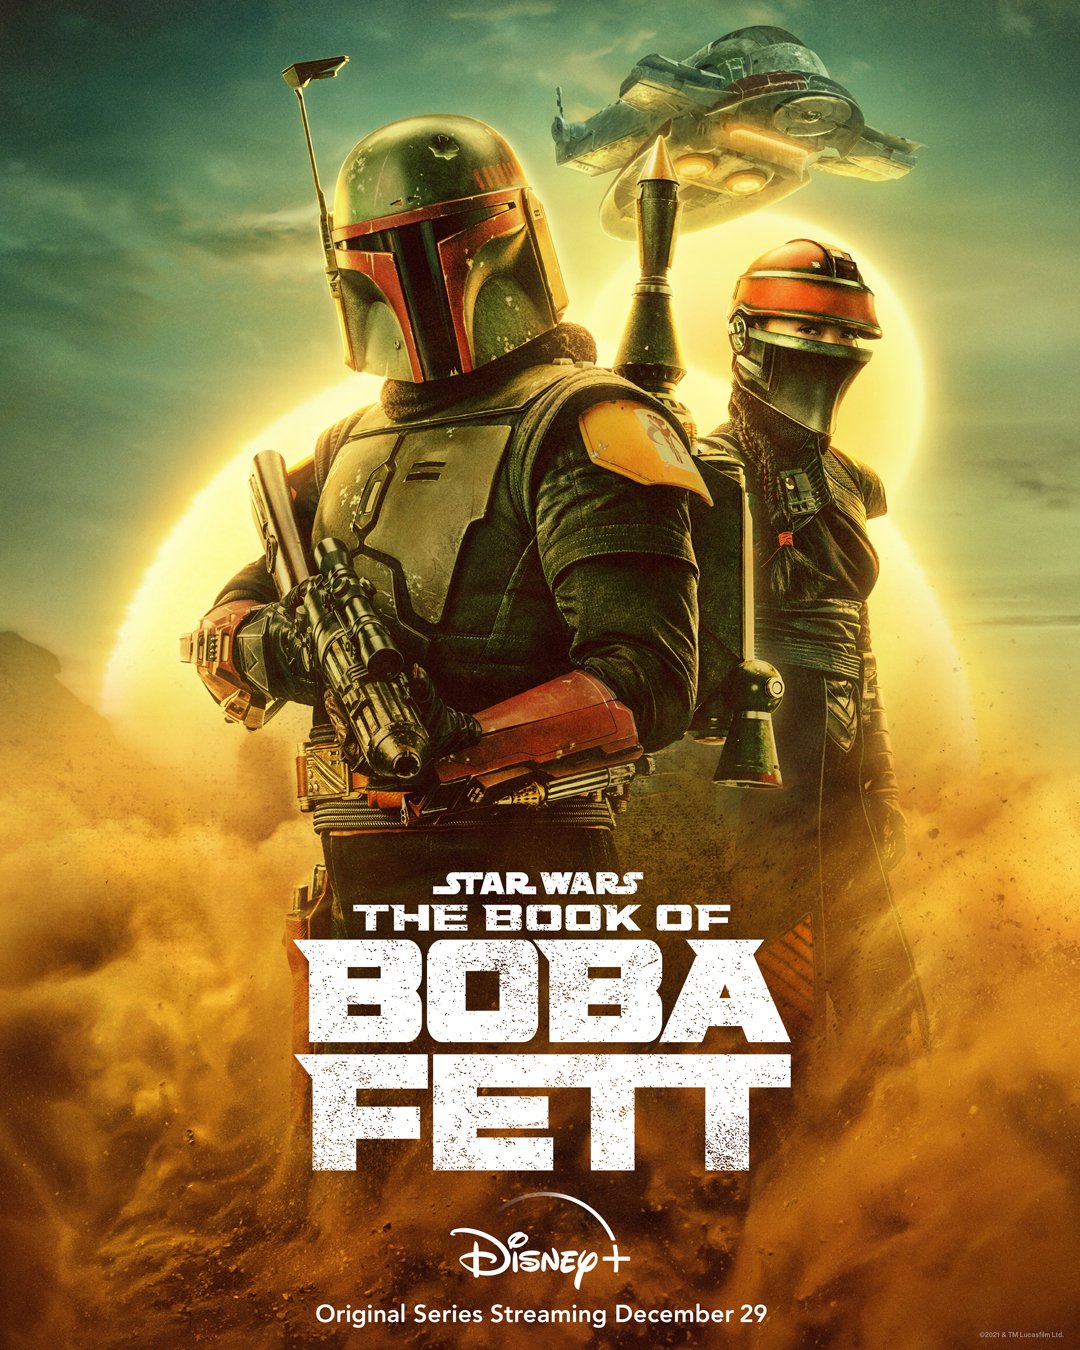 official poster for The Book of Boba Fett